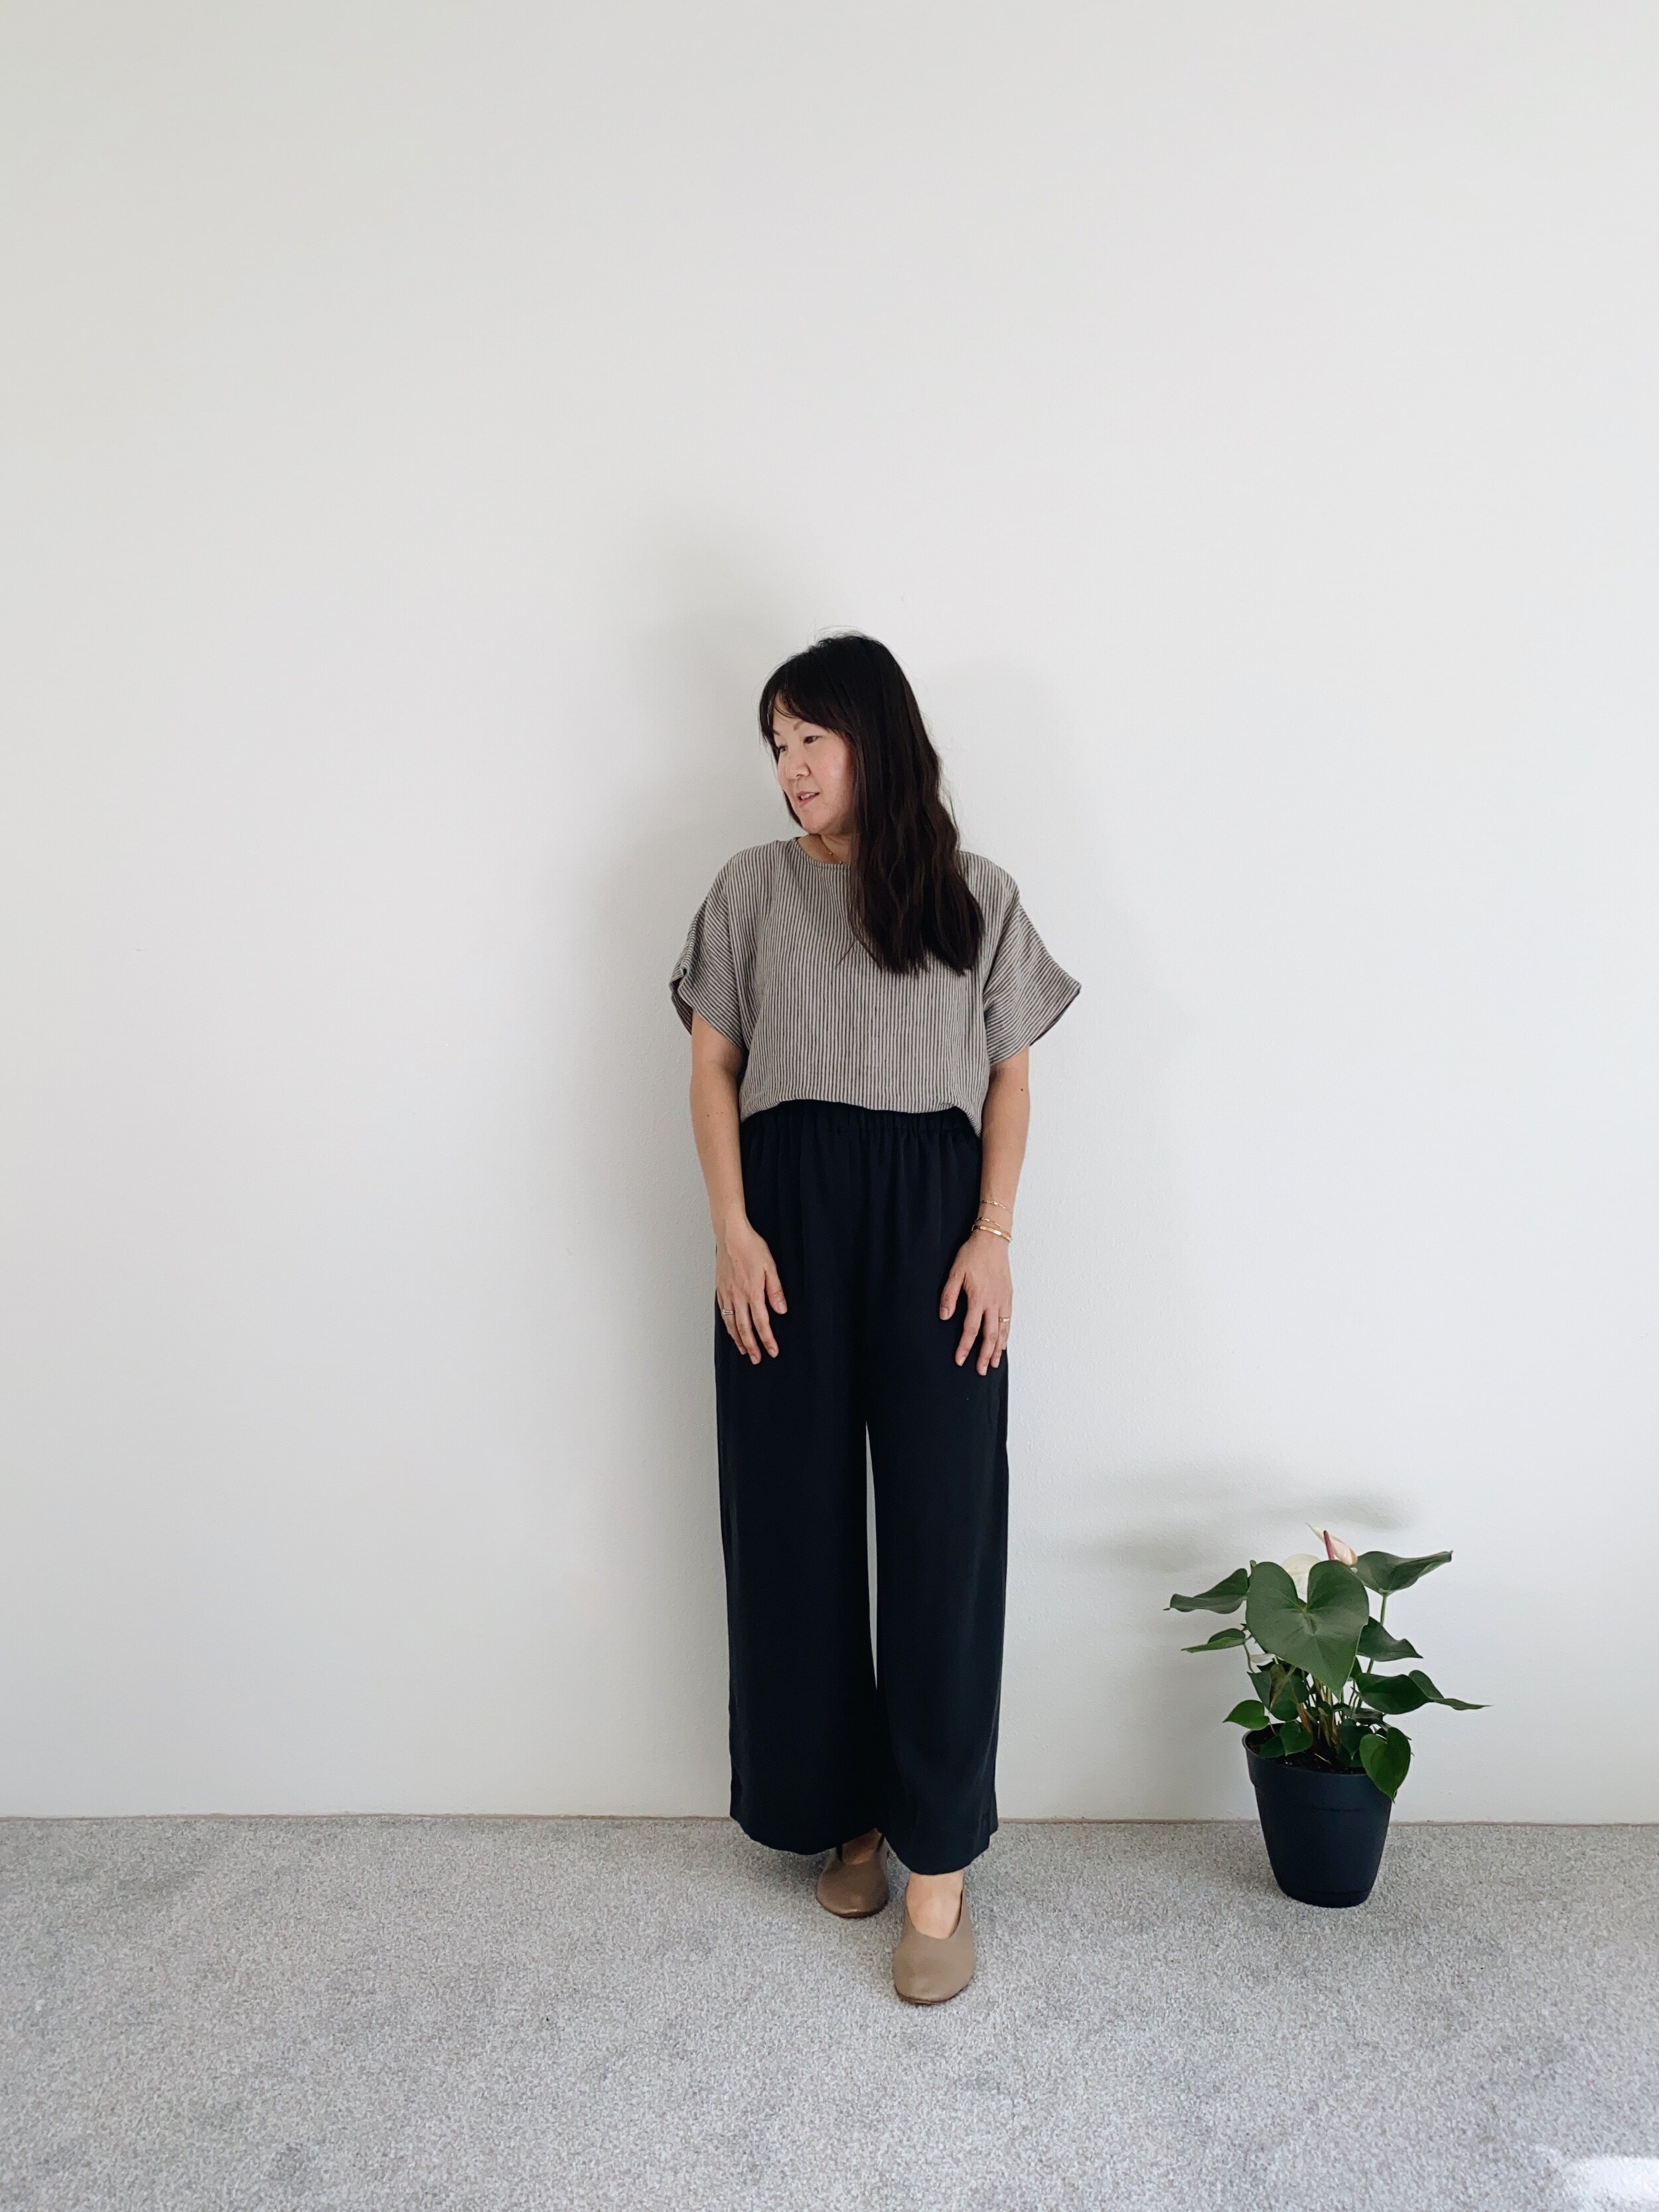 Only Child Clothing Review: Tencel Cove Pants — Fairly Curated